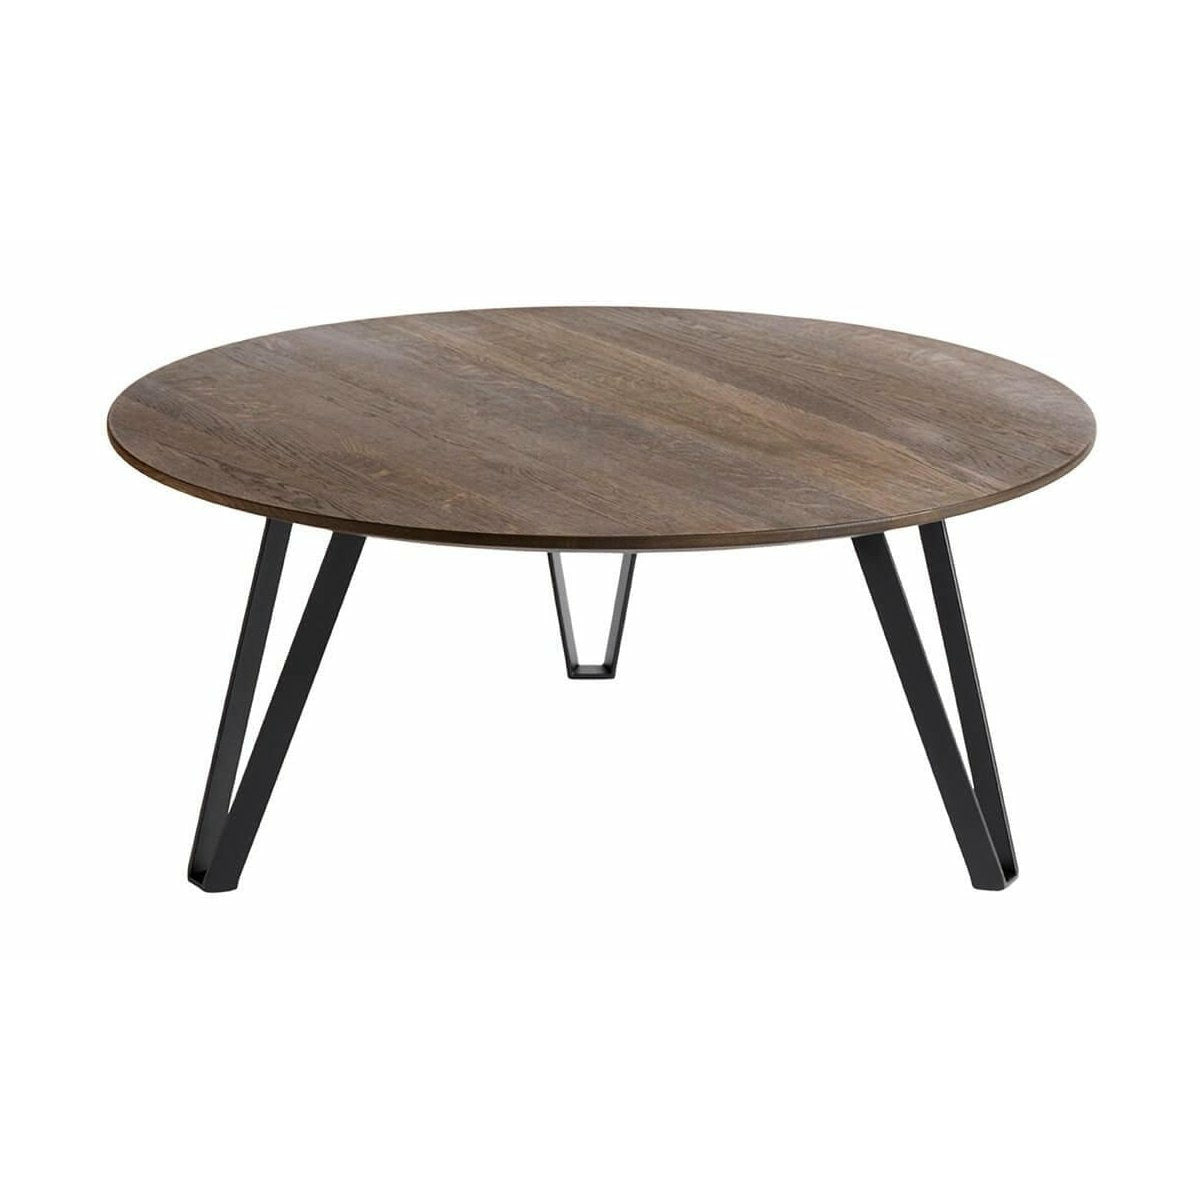 Muubs Space Sofabord Smoked Oak, Ø90cm